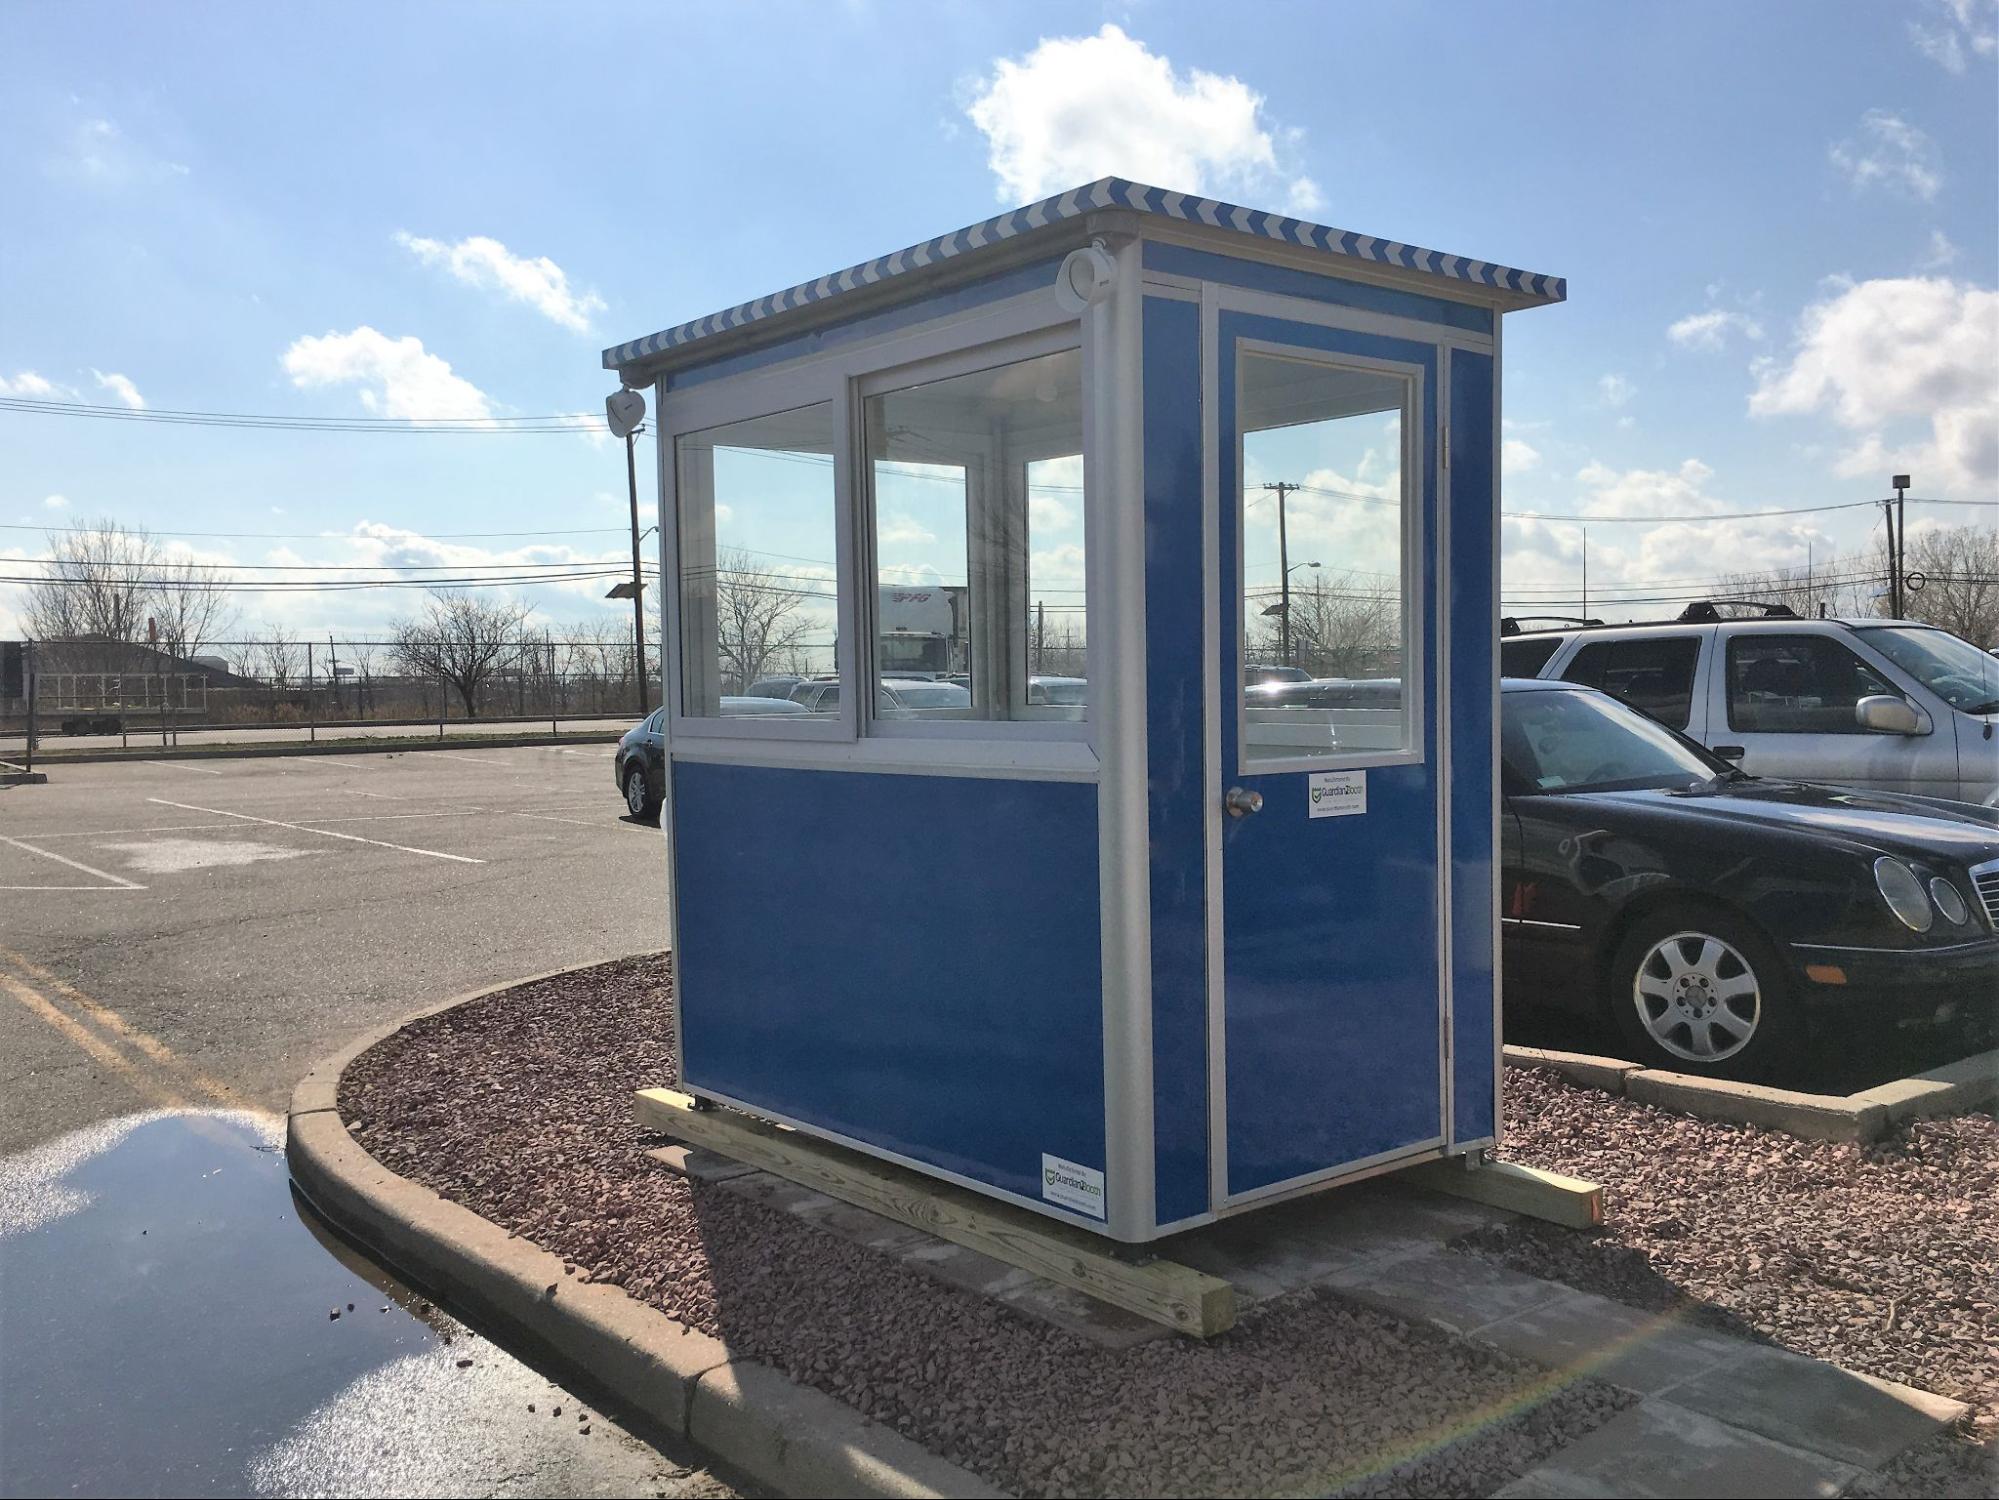 security guard shack for CTPAT compliance